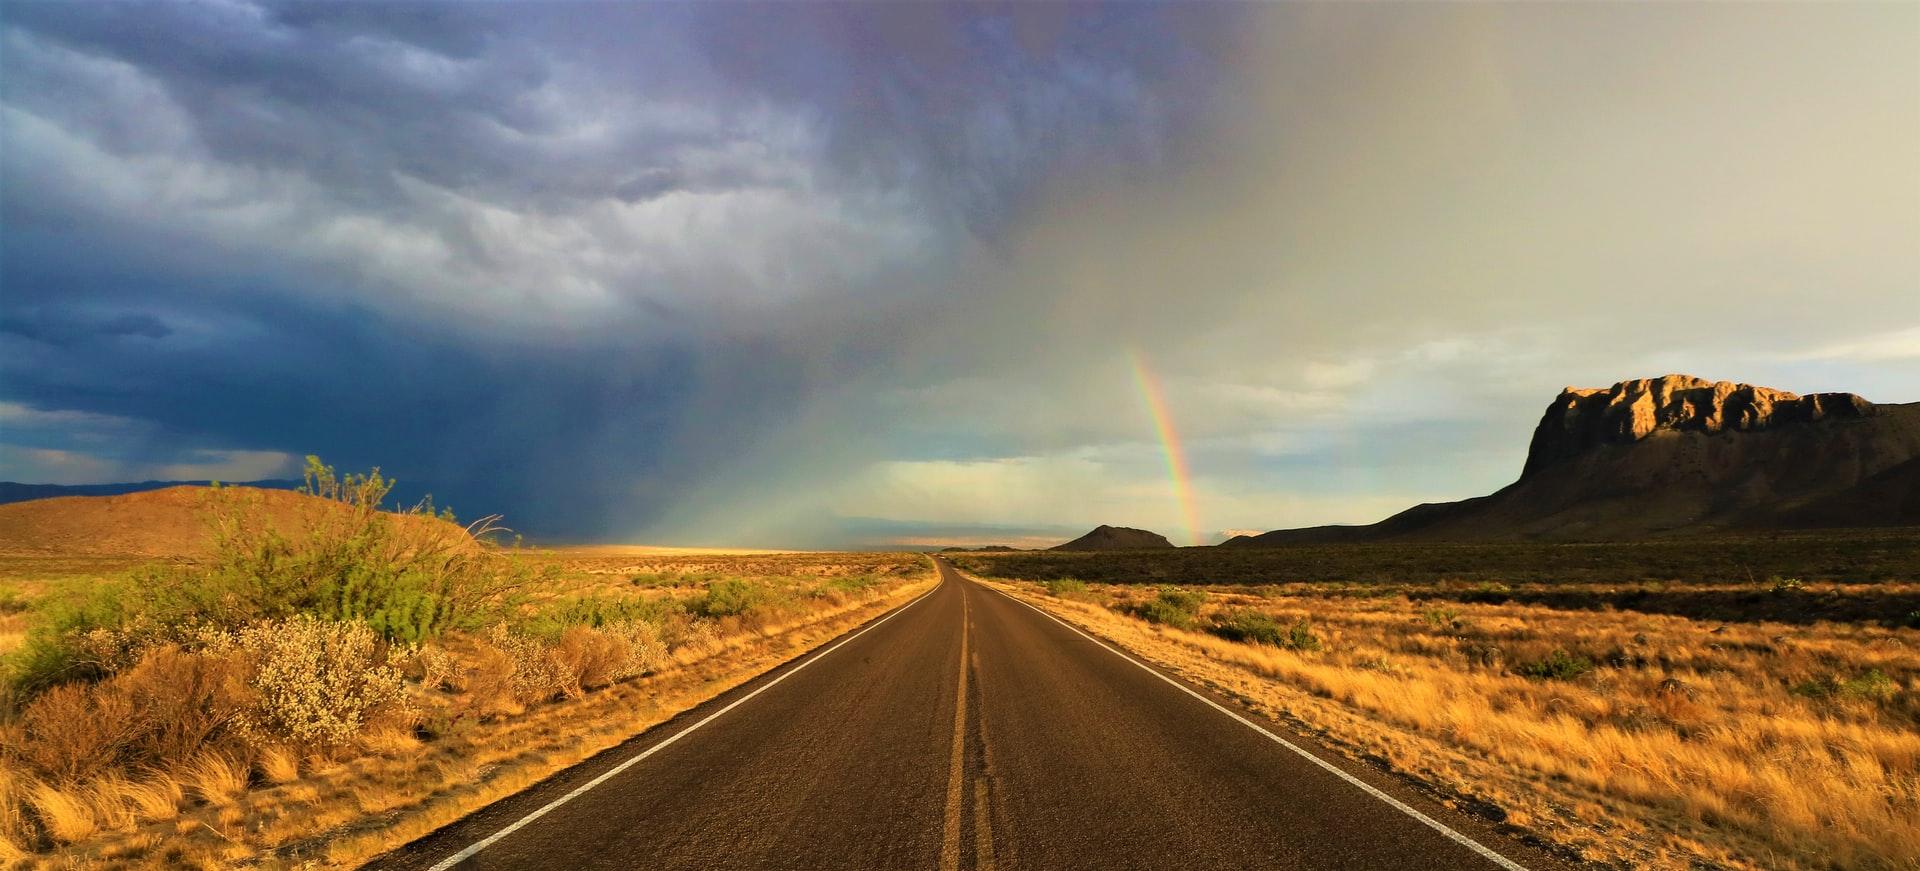 Incoming storm and a rainbow in Big Bend National Park